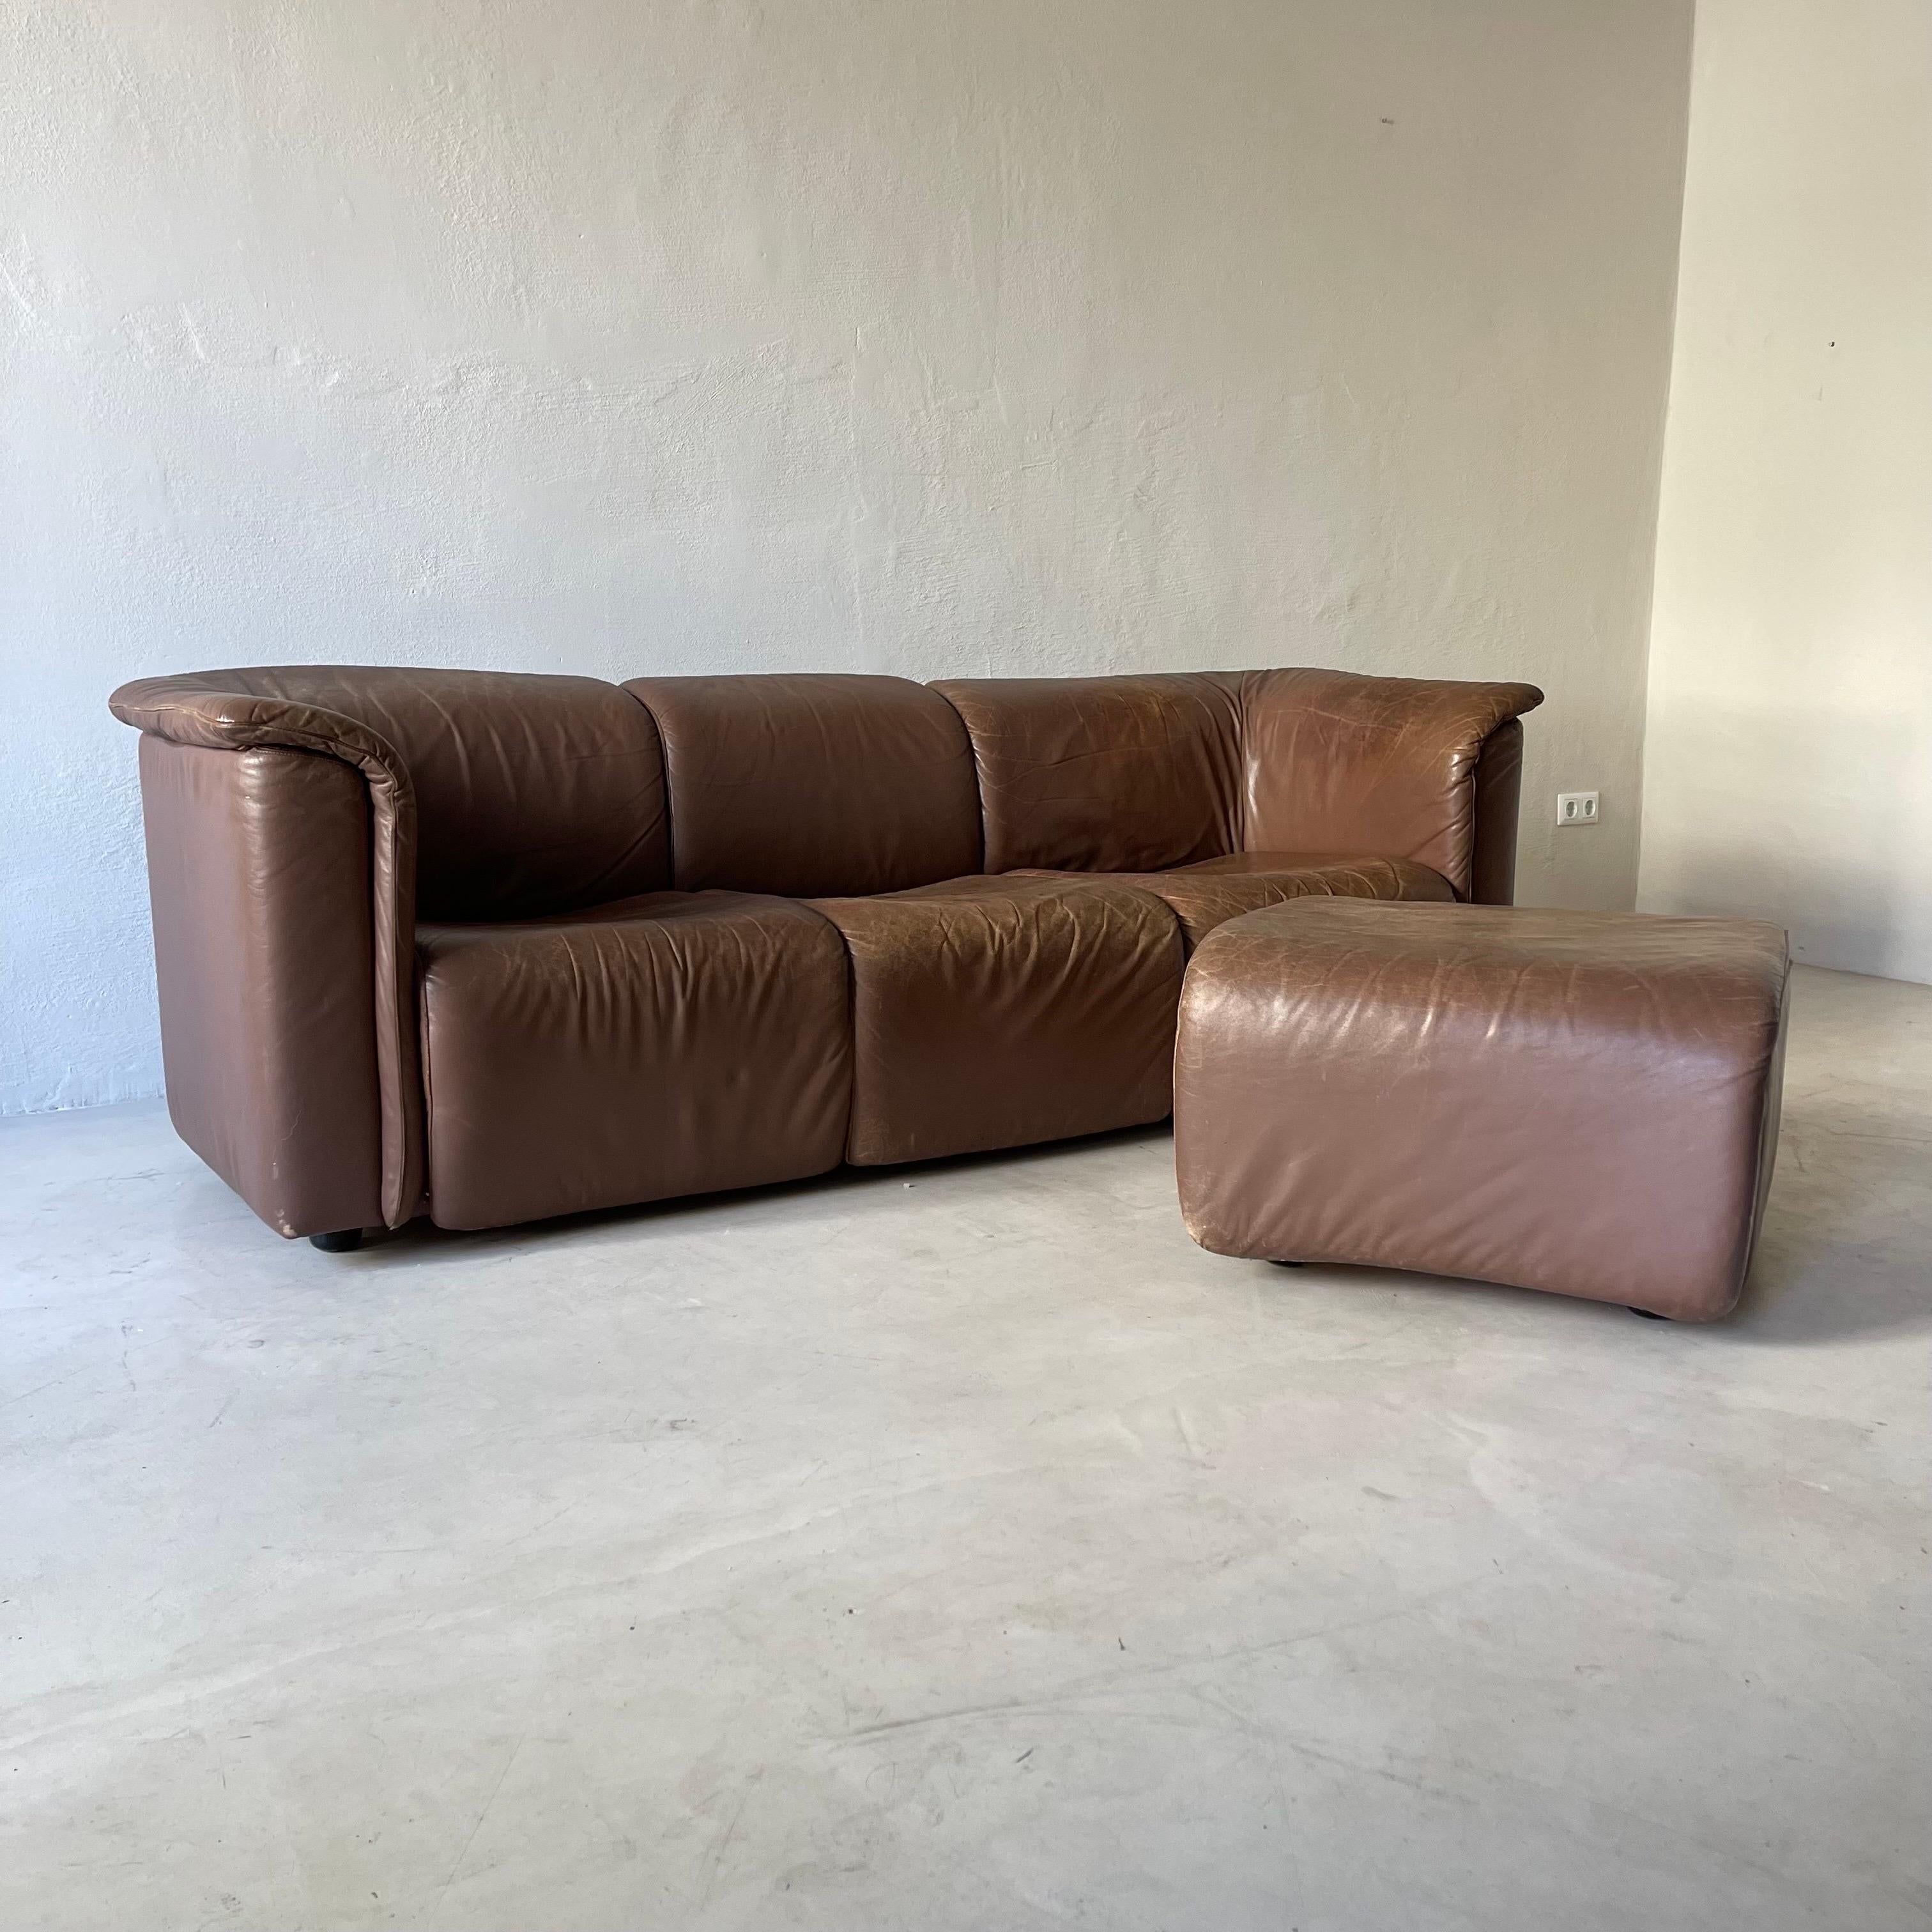 Hochbarett sofa designed by Karl Wittmann and manufactured by Wittmann Moebelwerkstaetten, reknown for their exceptional quality and craftsmanship. This is a splendid set of two, with a three seater sofa and one additional ottoman.